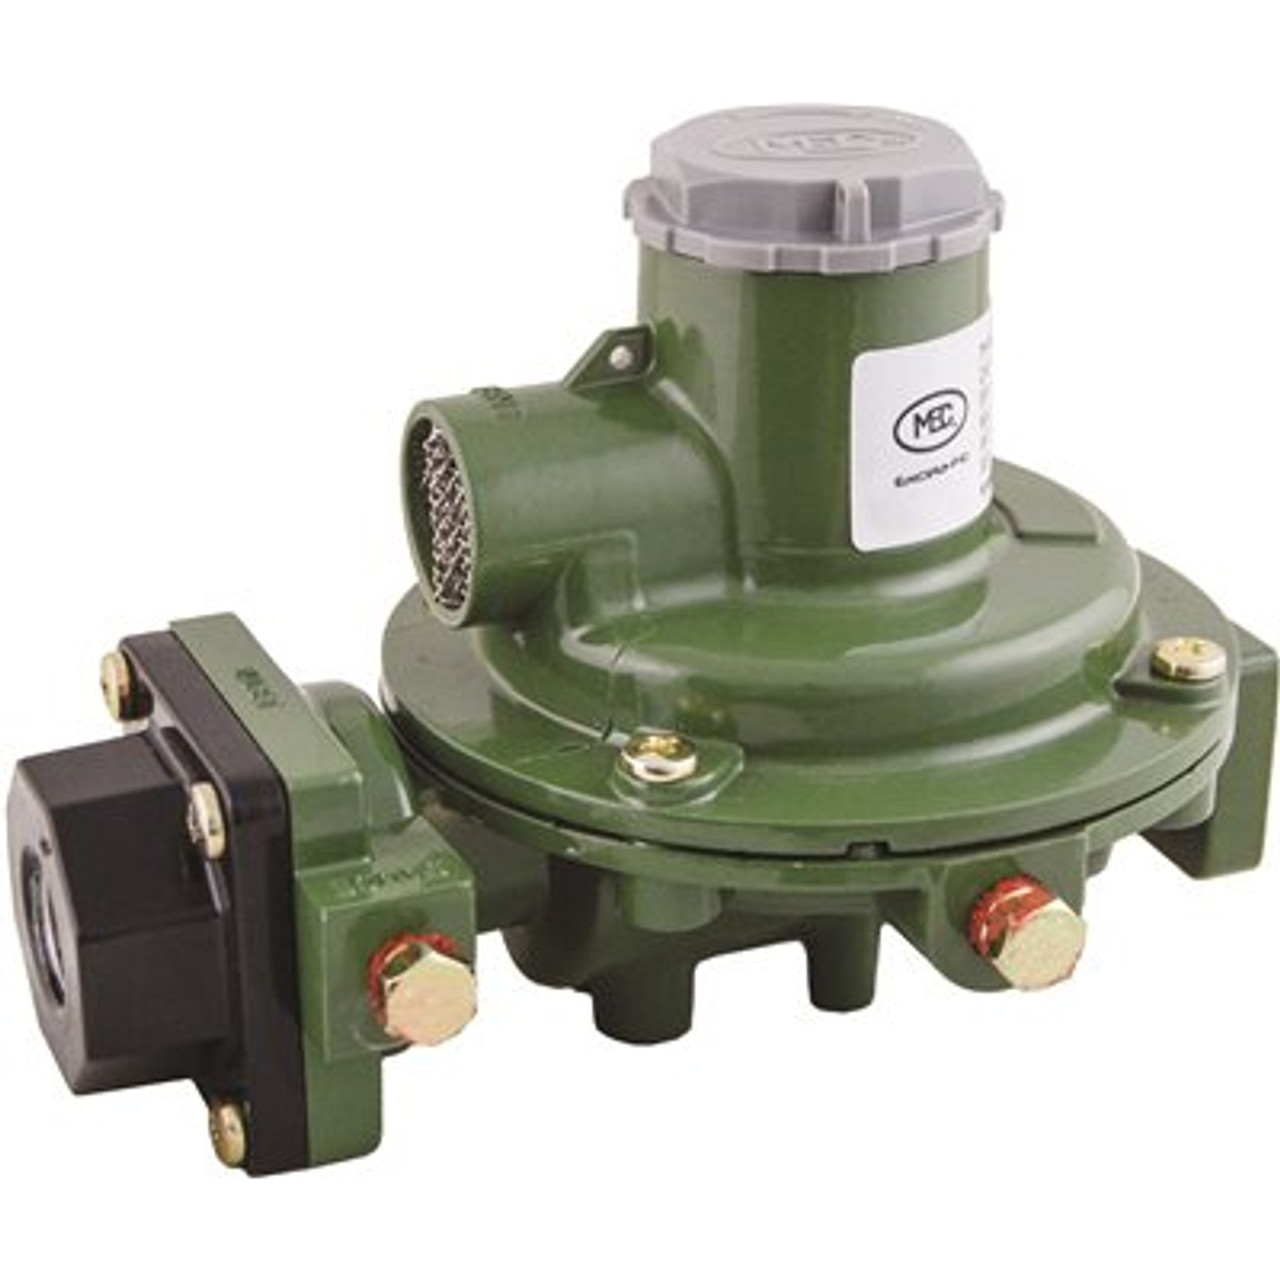 Excela-Flo MEC Compact Second Stage Regulator 1/2 in. FNPT Inlet x 1/2 in. FNPT Outlet - 11 in. WC Outlet